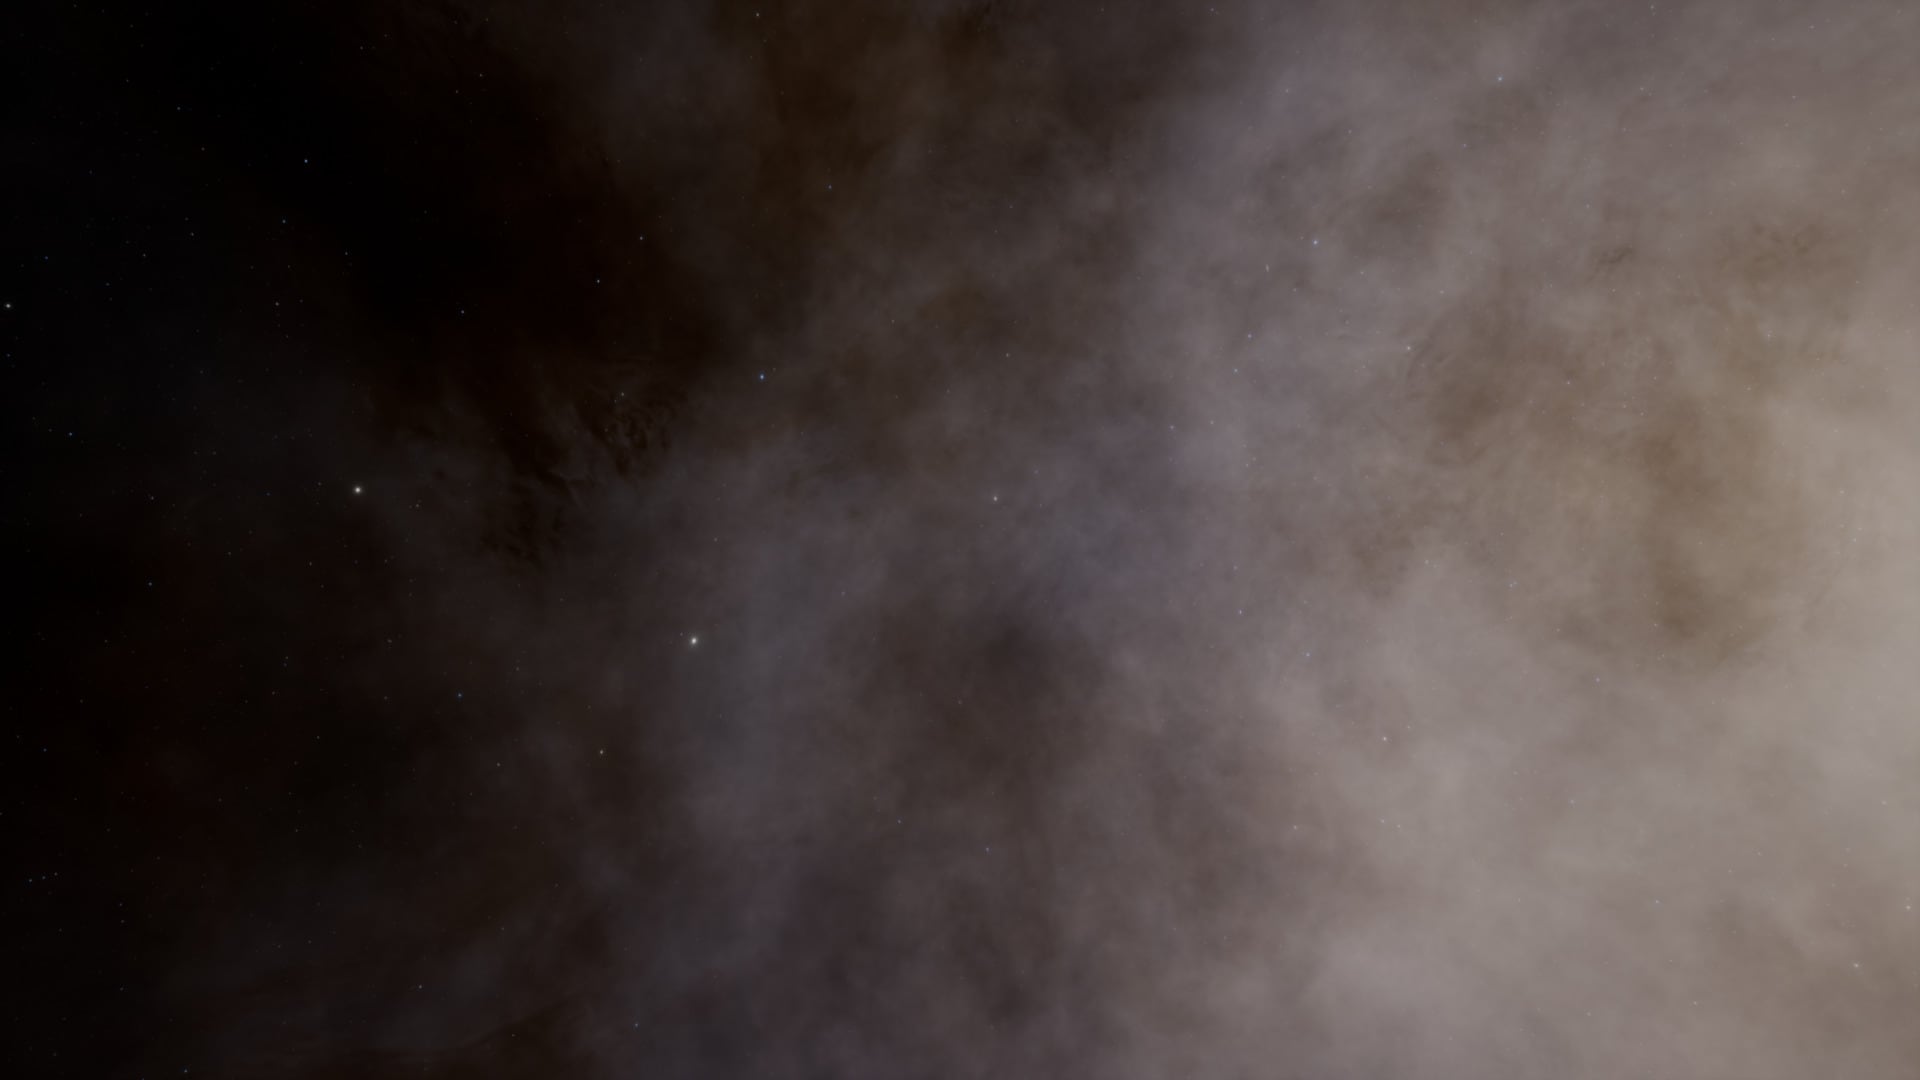 16 SPACE SKYBOXES